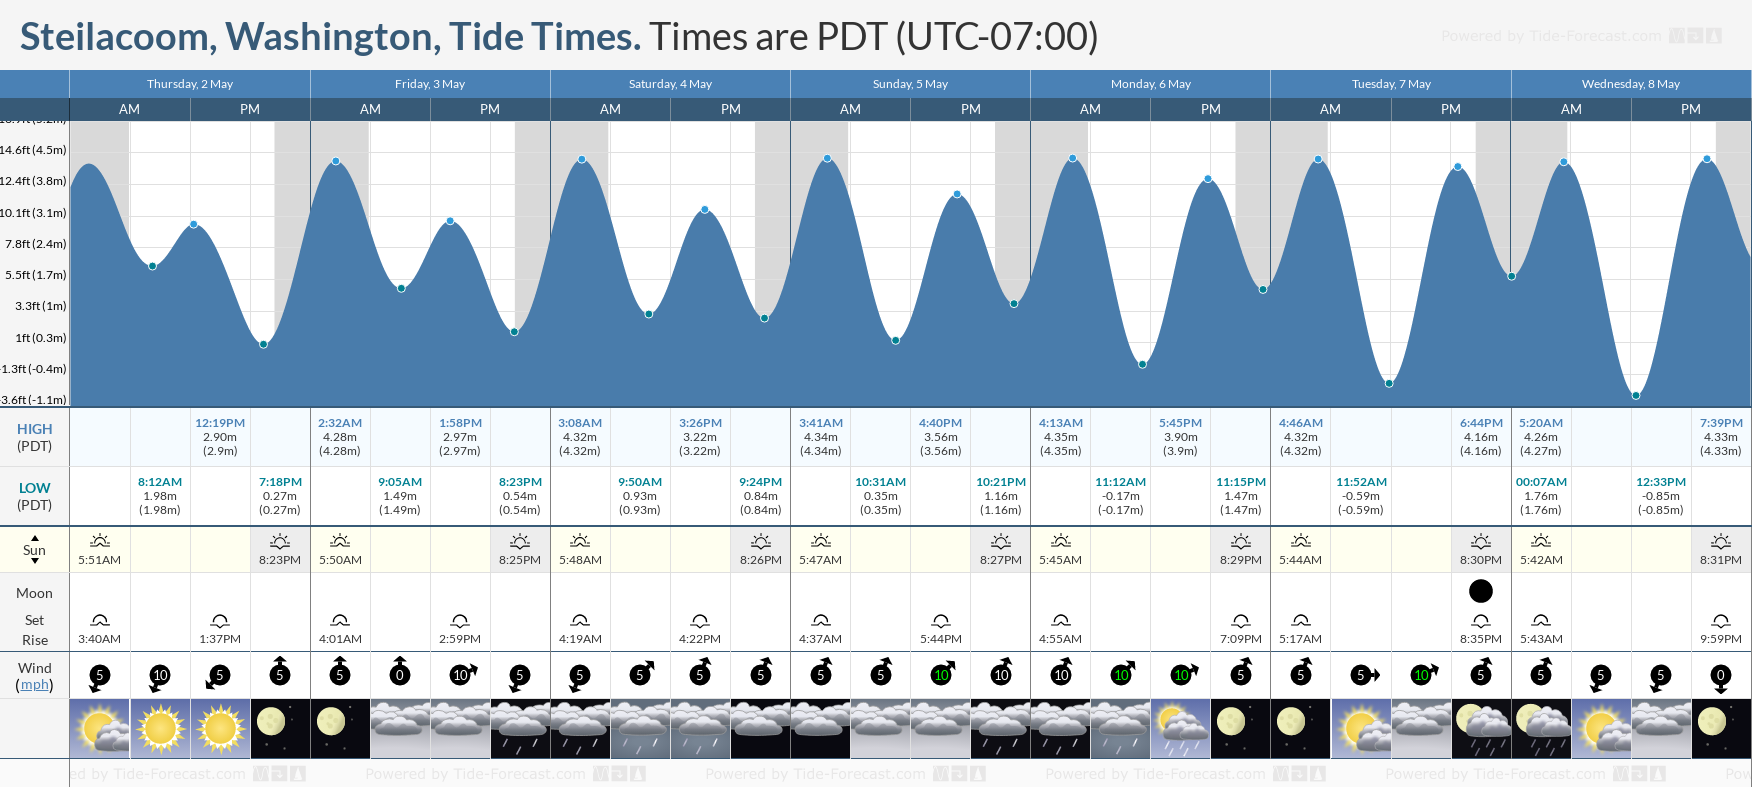 Steilacoom, Washington Tide Chart including high and low tide tide times for the next 7 days